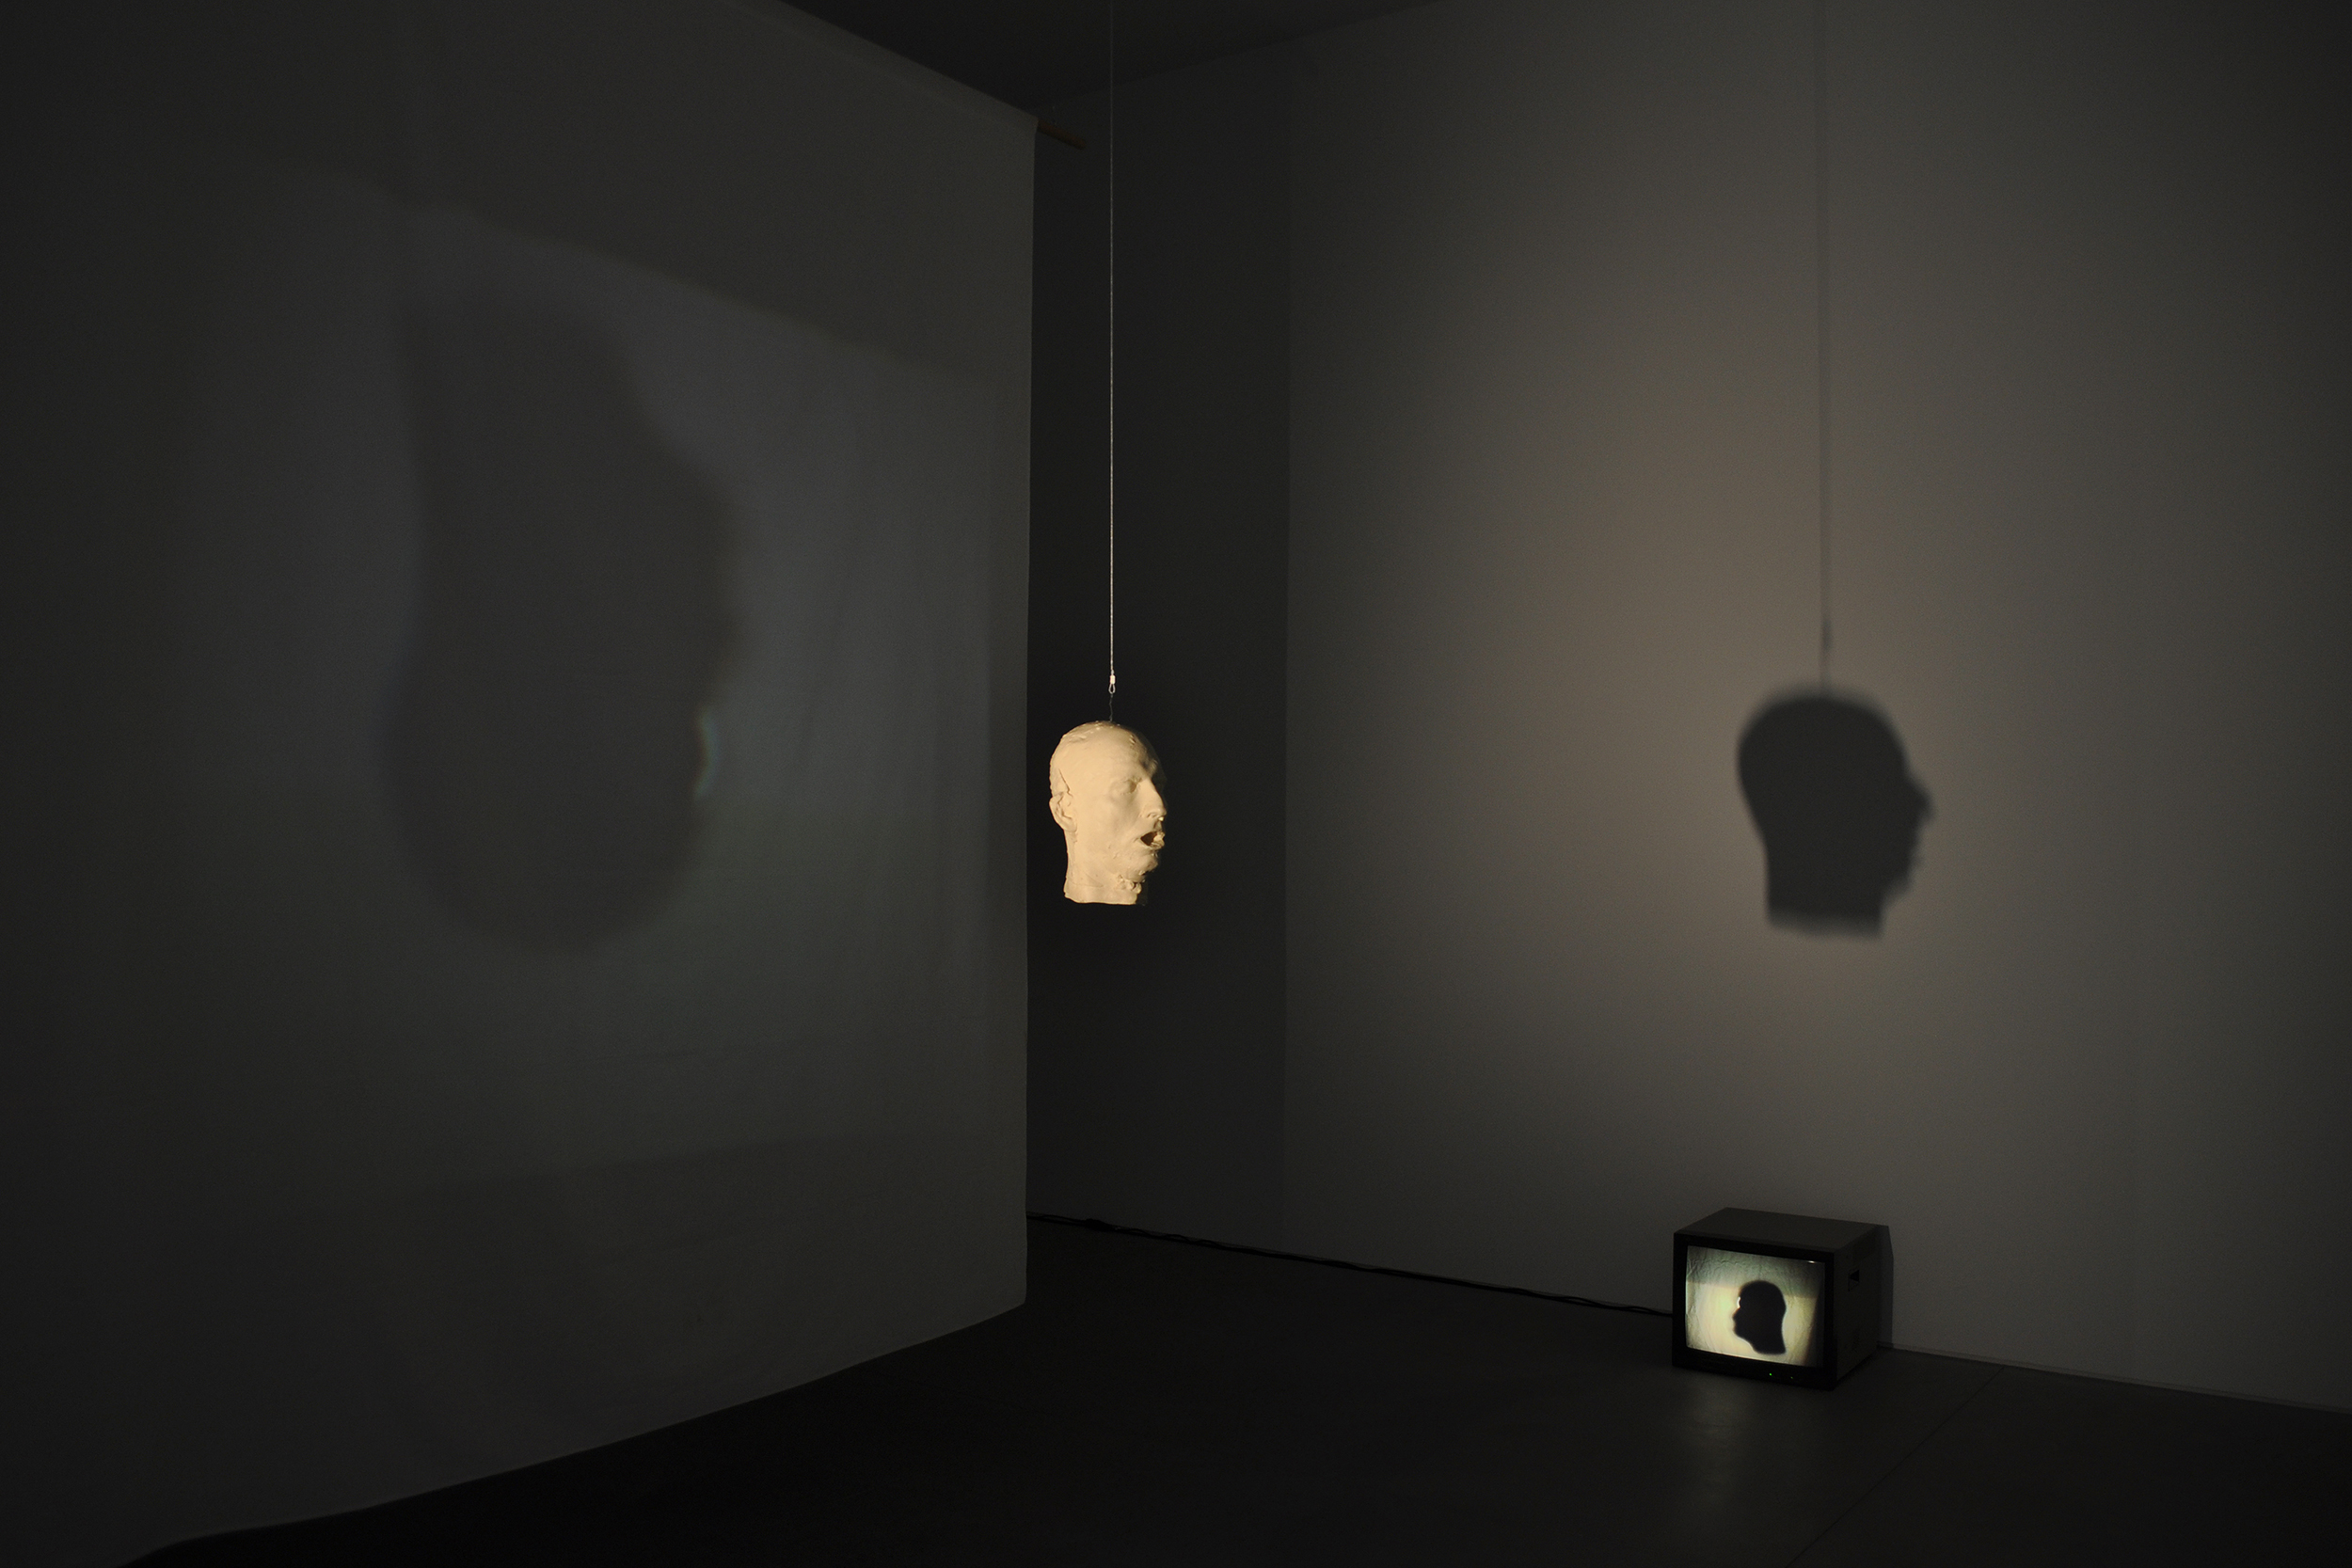 A white figure head is suspended from the ceiling in a black room. The shadow of the head plays on the wall.